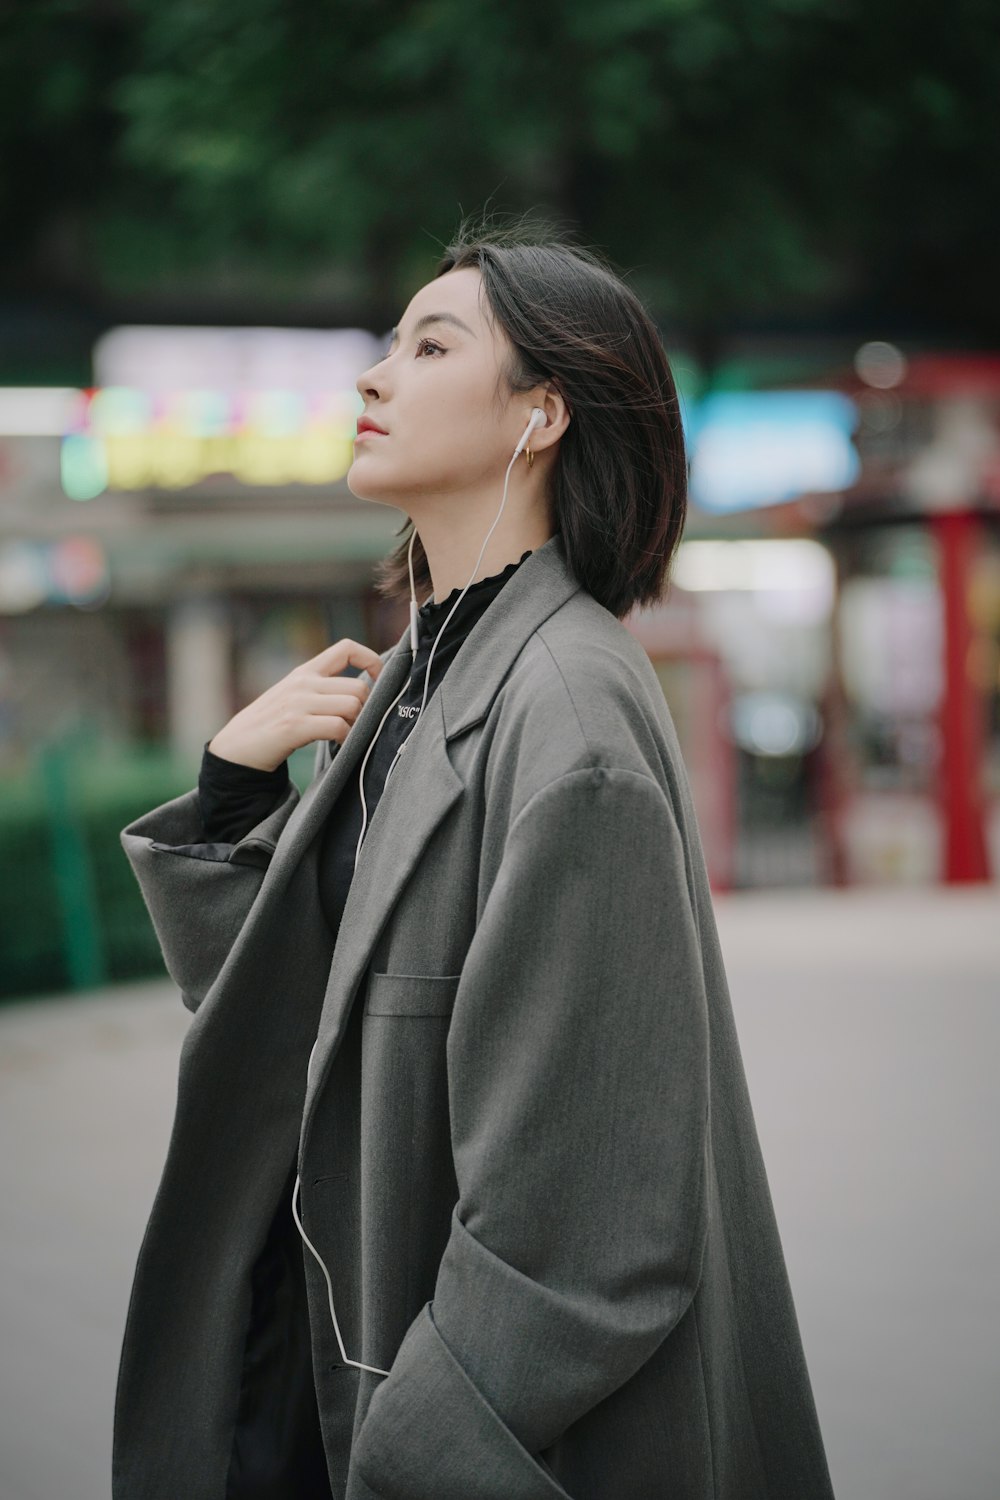 a woman wearing ear buds and a coat